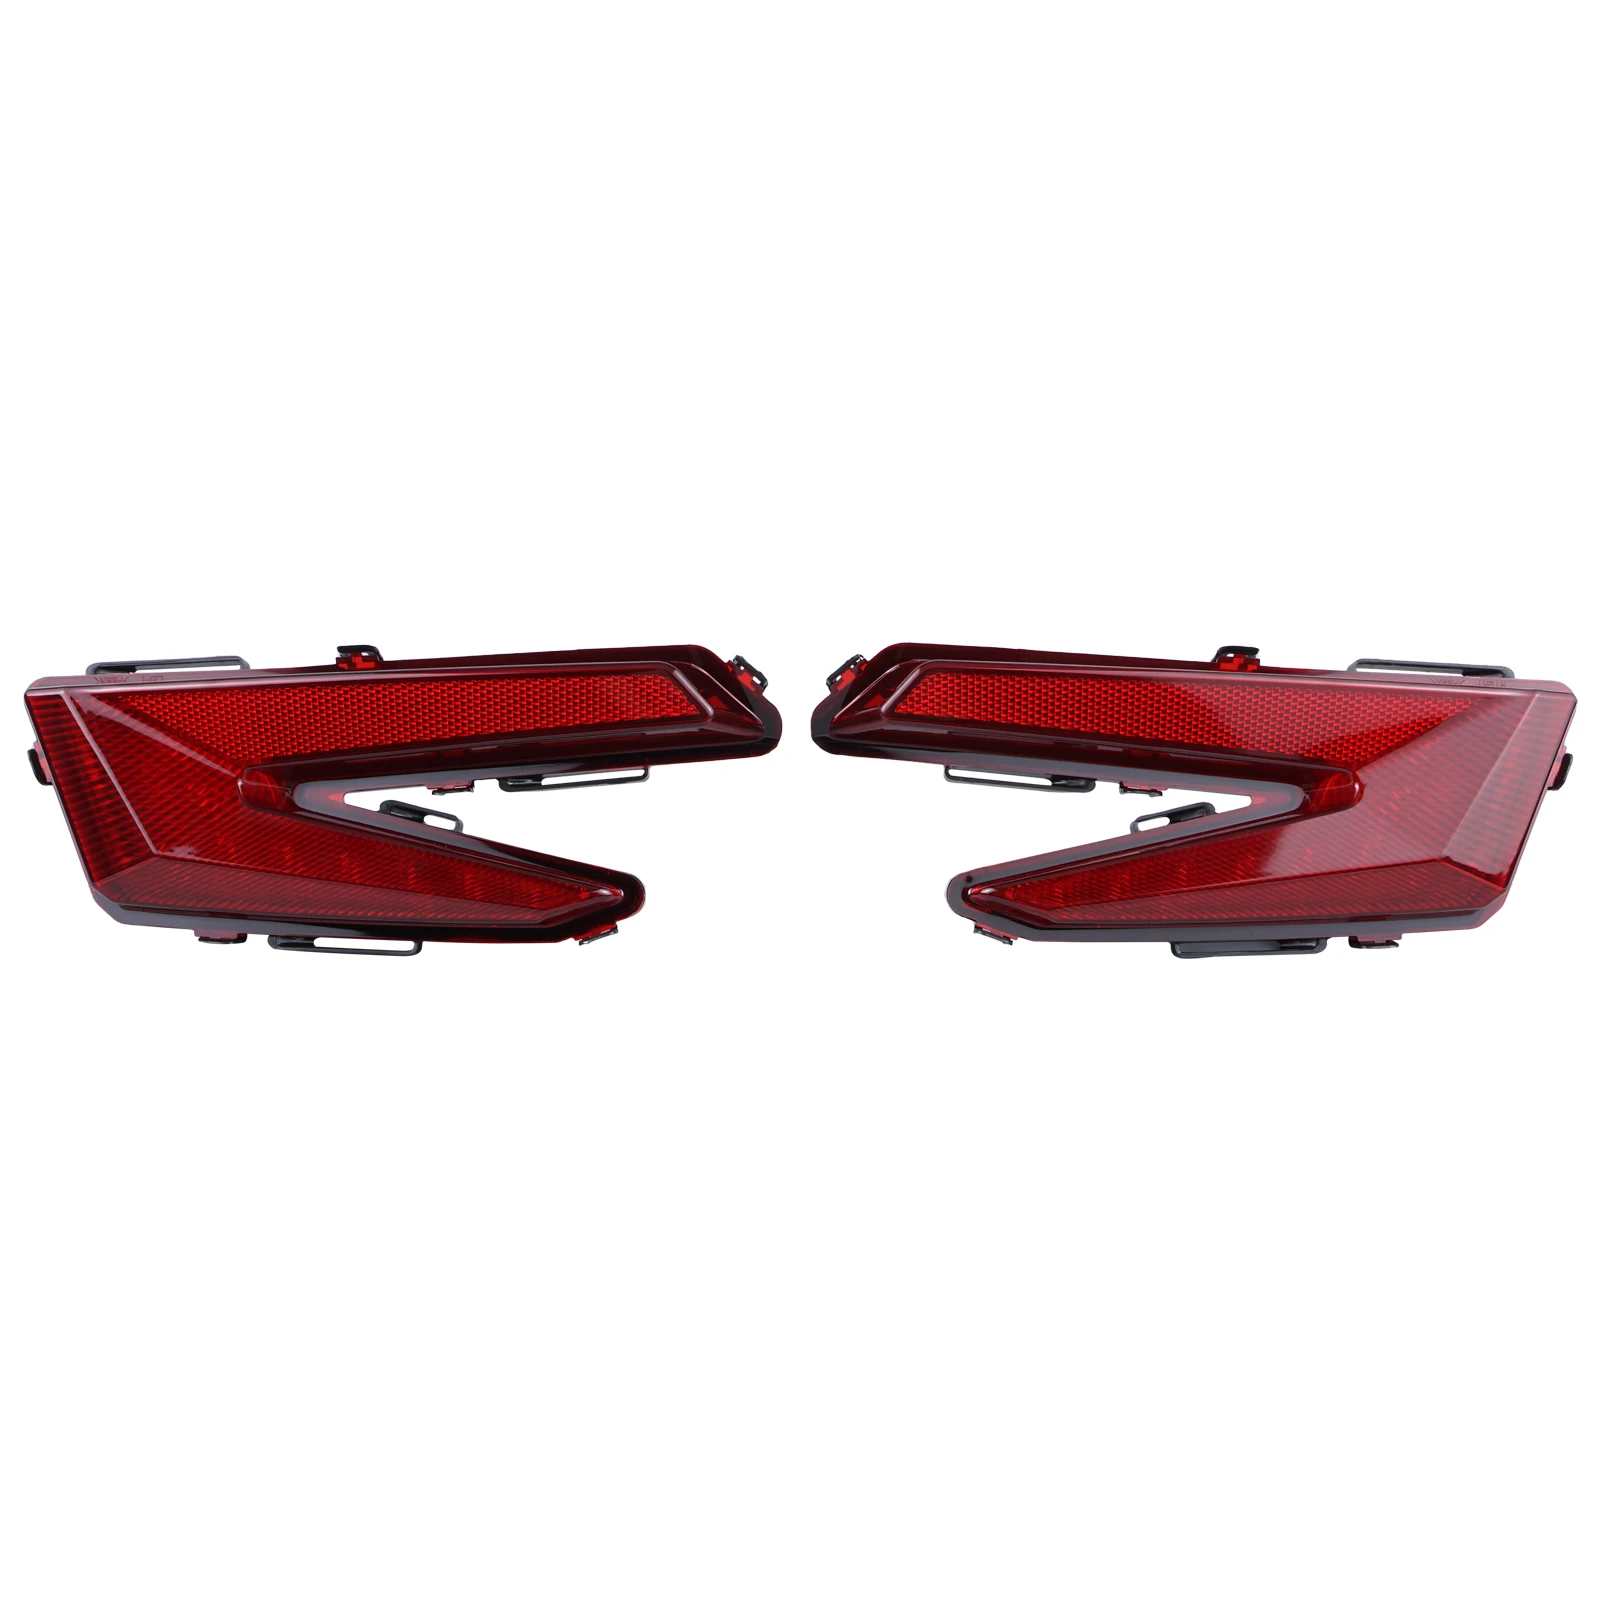 LED Brake Tail Lights UTV Left Right For Can Am Maverick X3 4x4 Turbo DPS 2017-2021 Max R 4x4 XRS DS 2020 2019 2018 Accessories